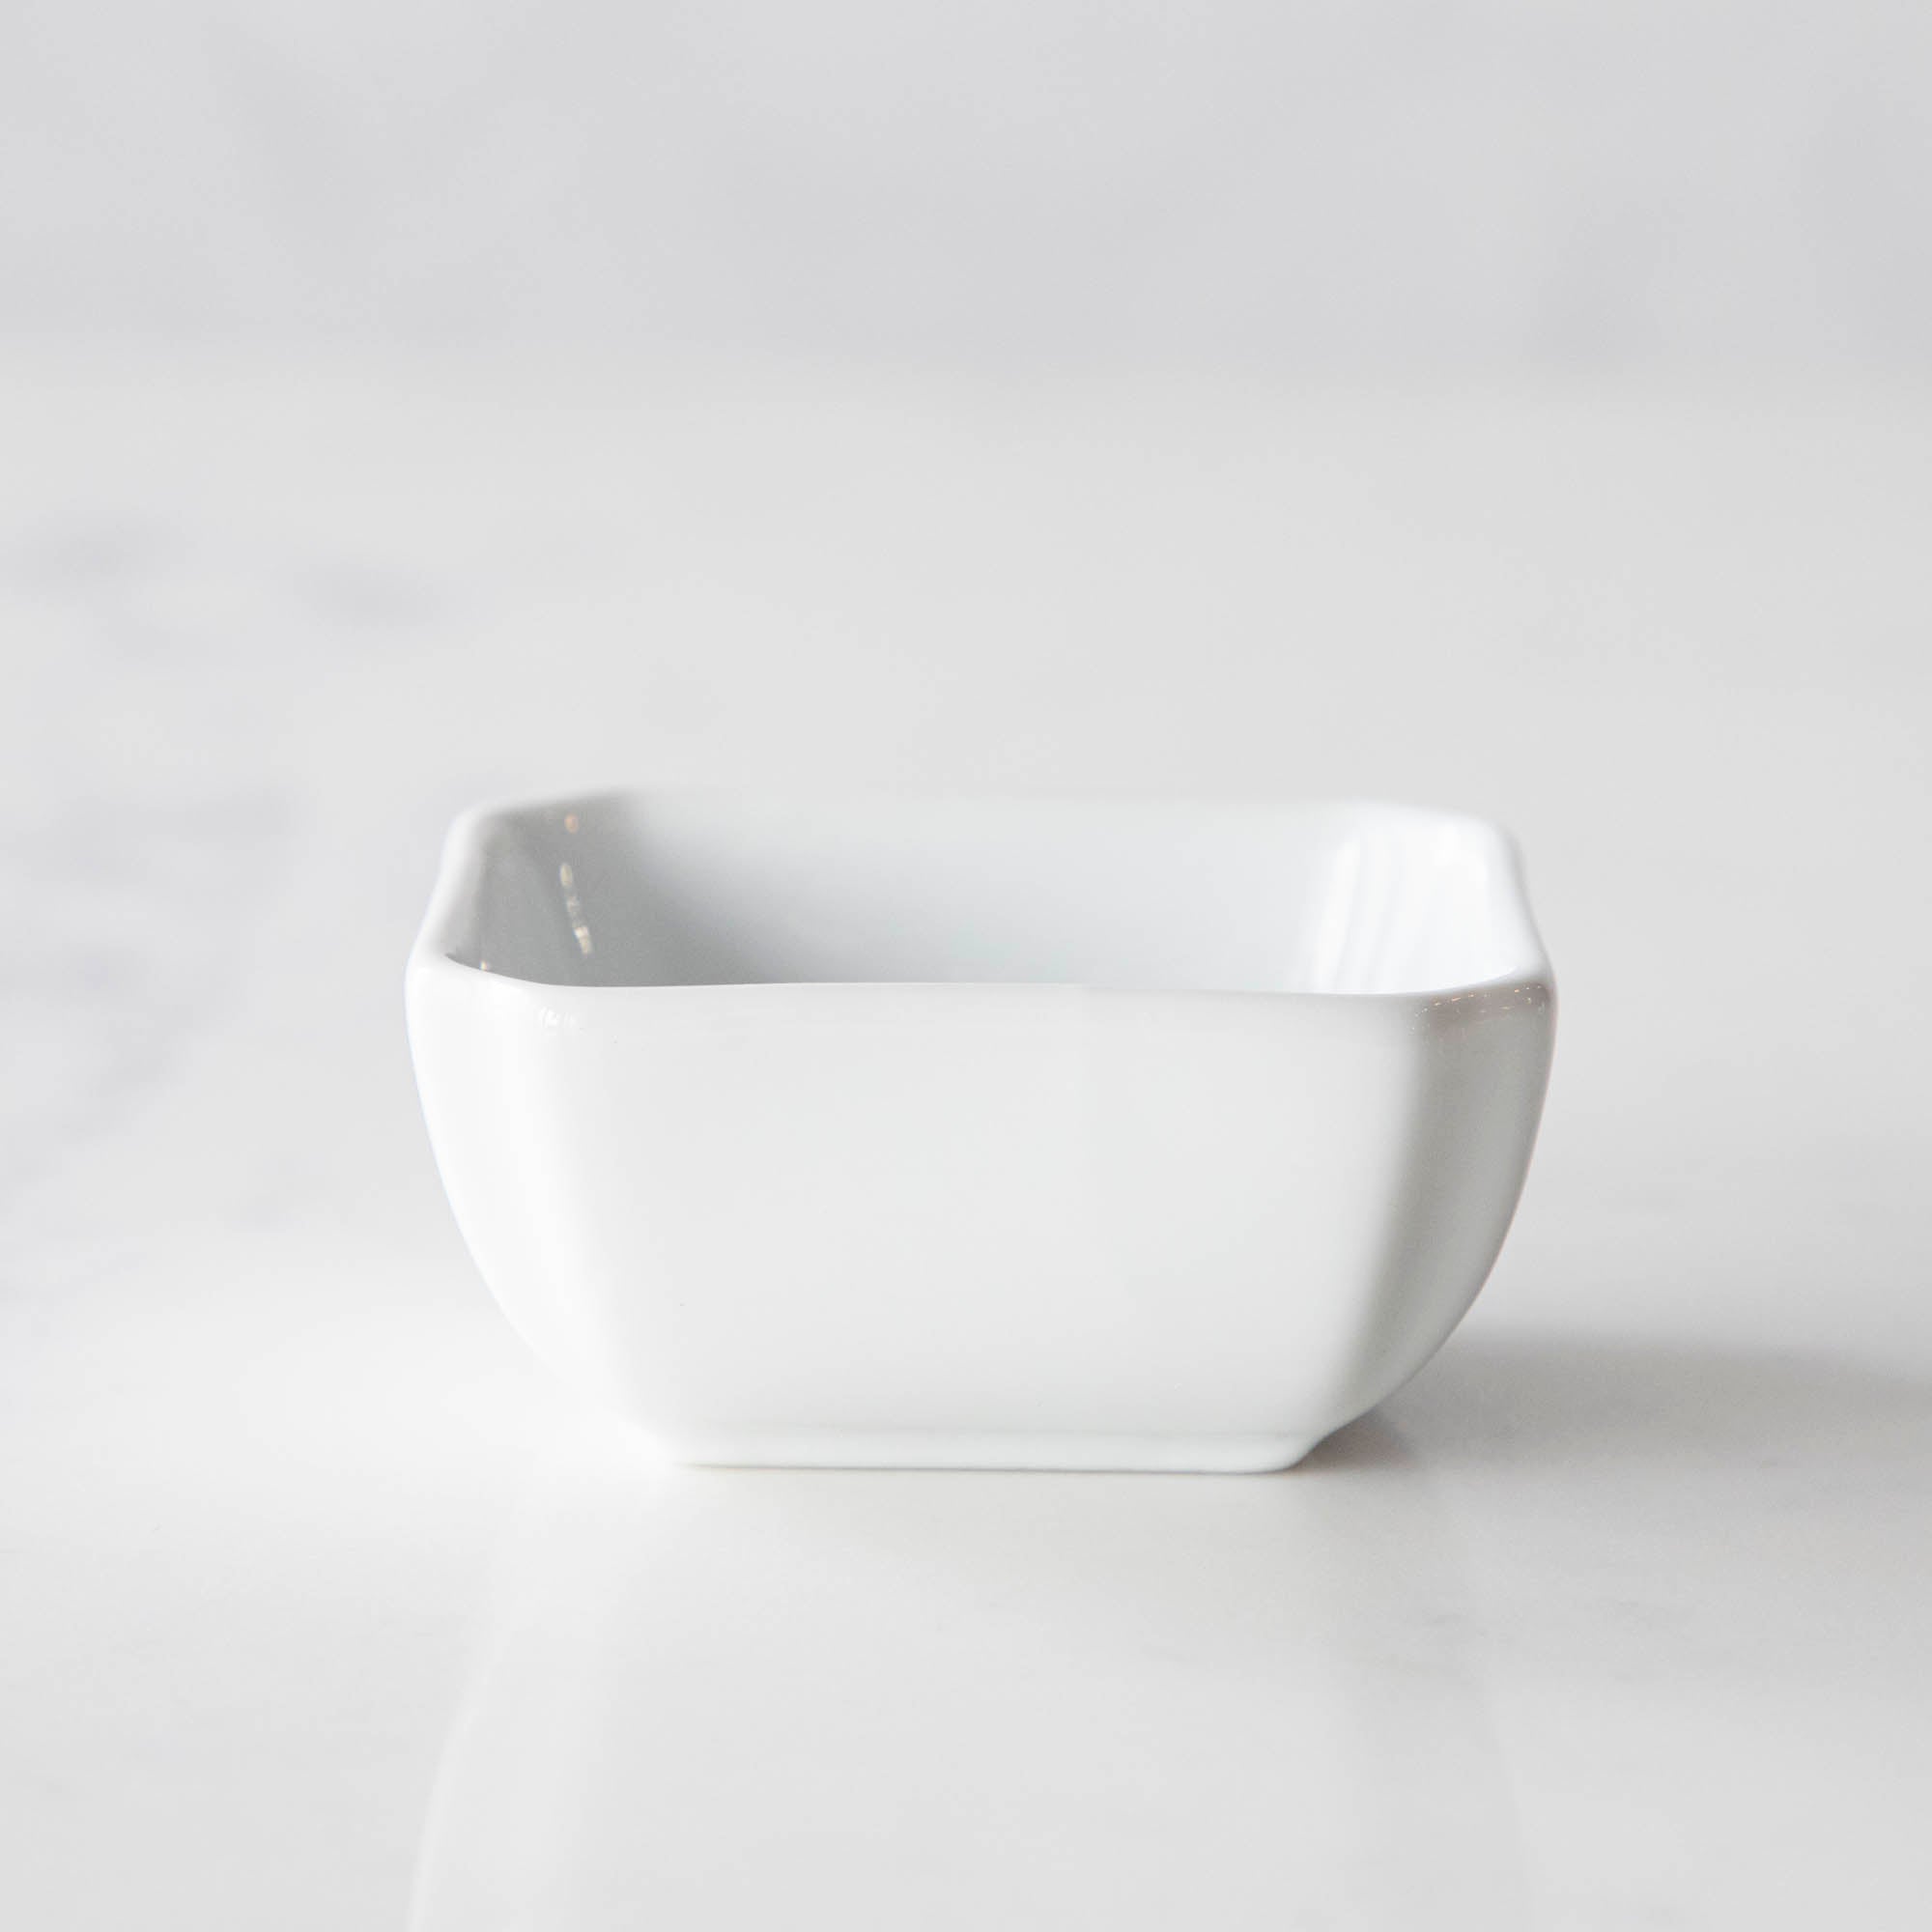 Three White Porcelain Mini Bowls with assorted spices and a spoon on a marble surface by BIA.